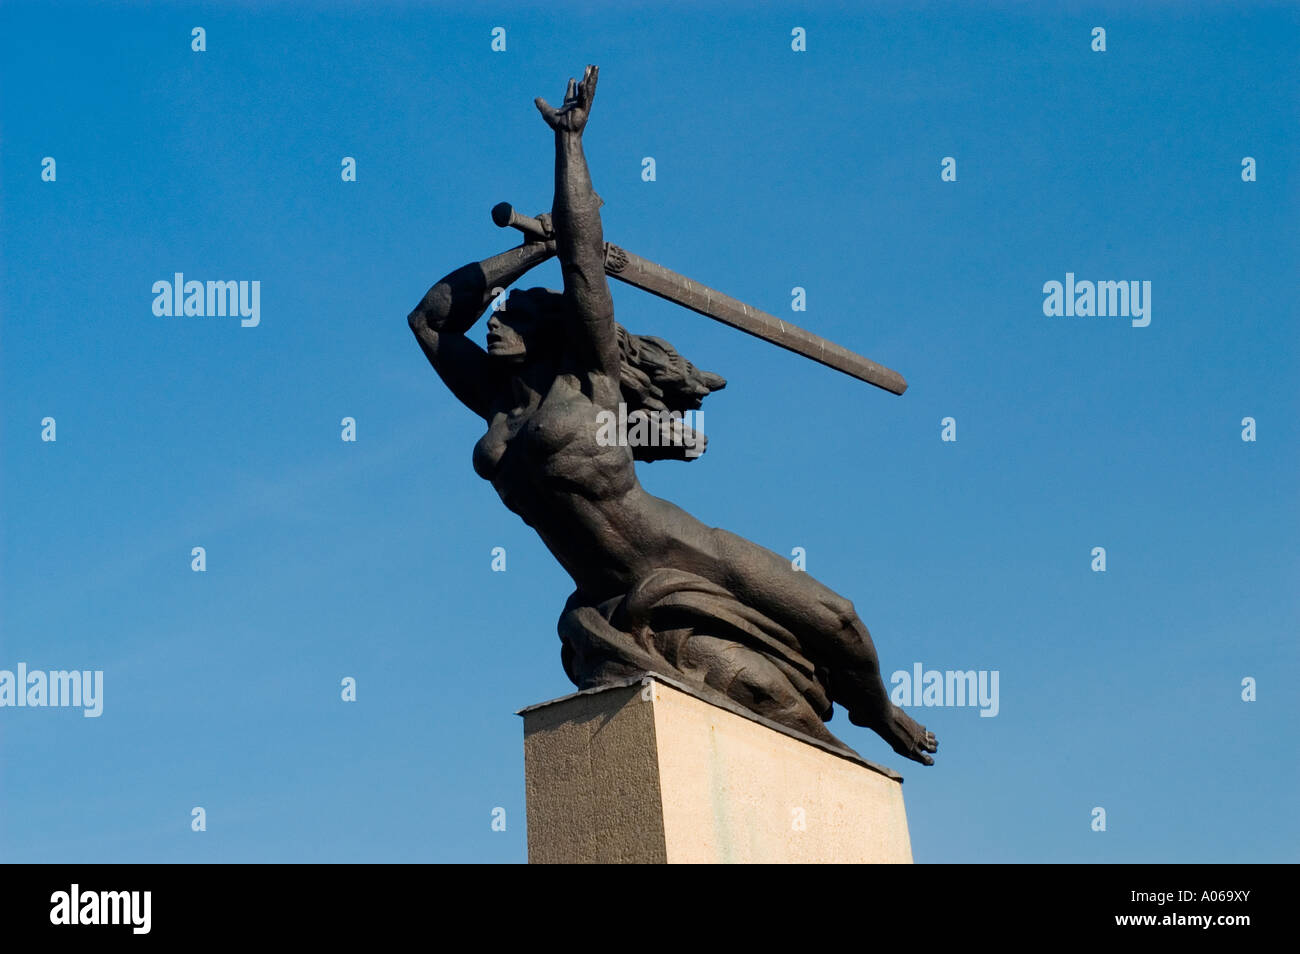 Nike with sword statue with blue sky background Warsaw Poland Stock Photo